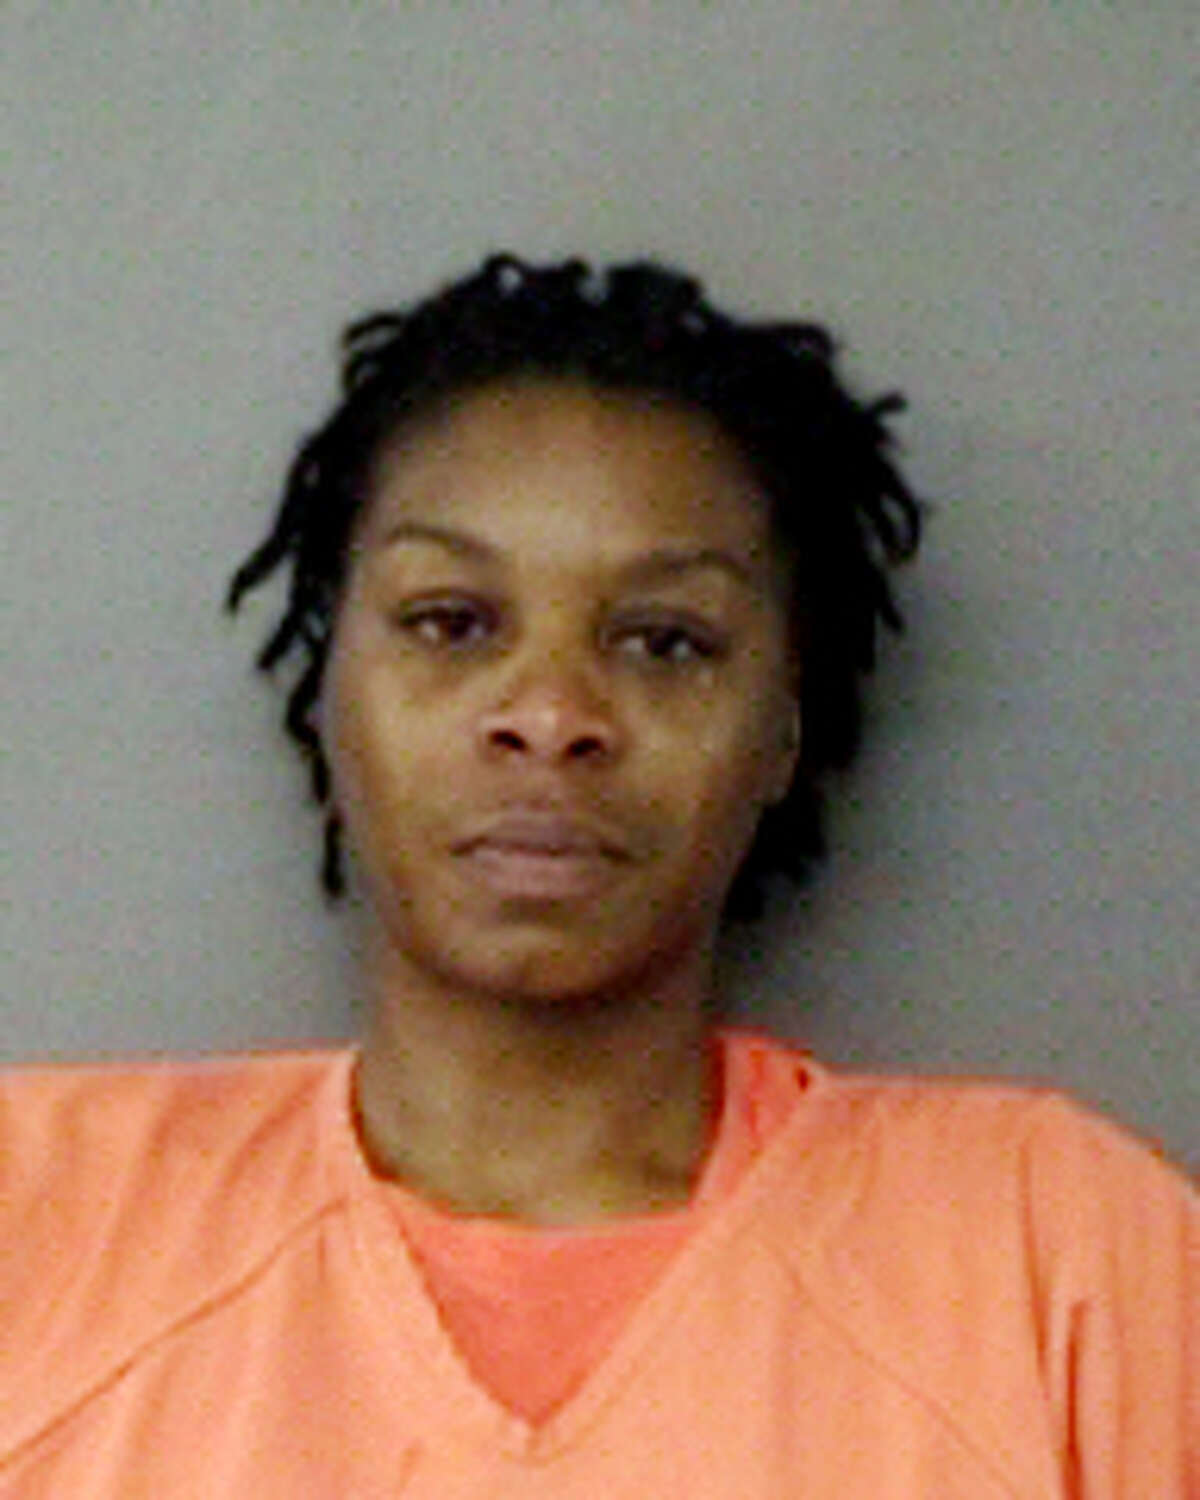 This undated handout photo provided by the Waller County SheriffÂ?’s Office shows Sandra Bland. The Texas Rangers are investigating the circumstances surrounding Bland's death Monday, July 13, 2015 in a Waller County jail cell in Hempstead, Texas. The Harris County medical examiner has classified her death as suicide by hanging. She had been arrested Friday in Waller County on a charge of assaulting a public servant. (Waller County SheriffÂ?’s Office, via AP)